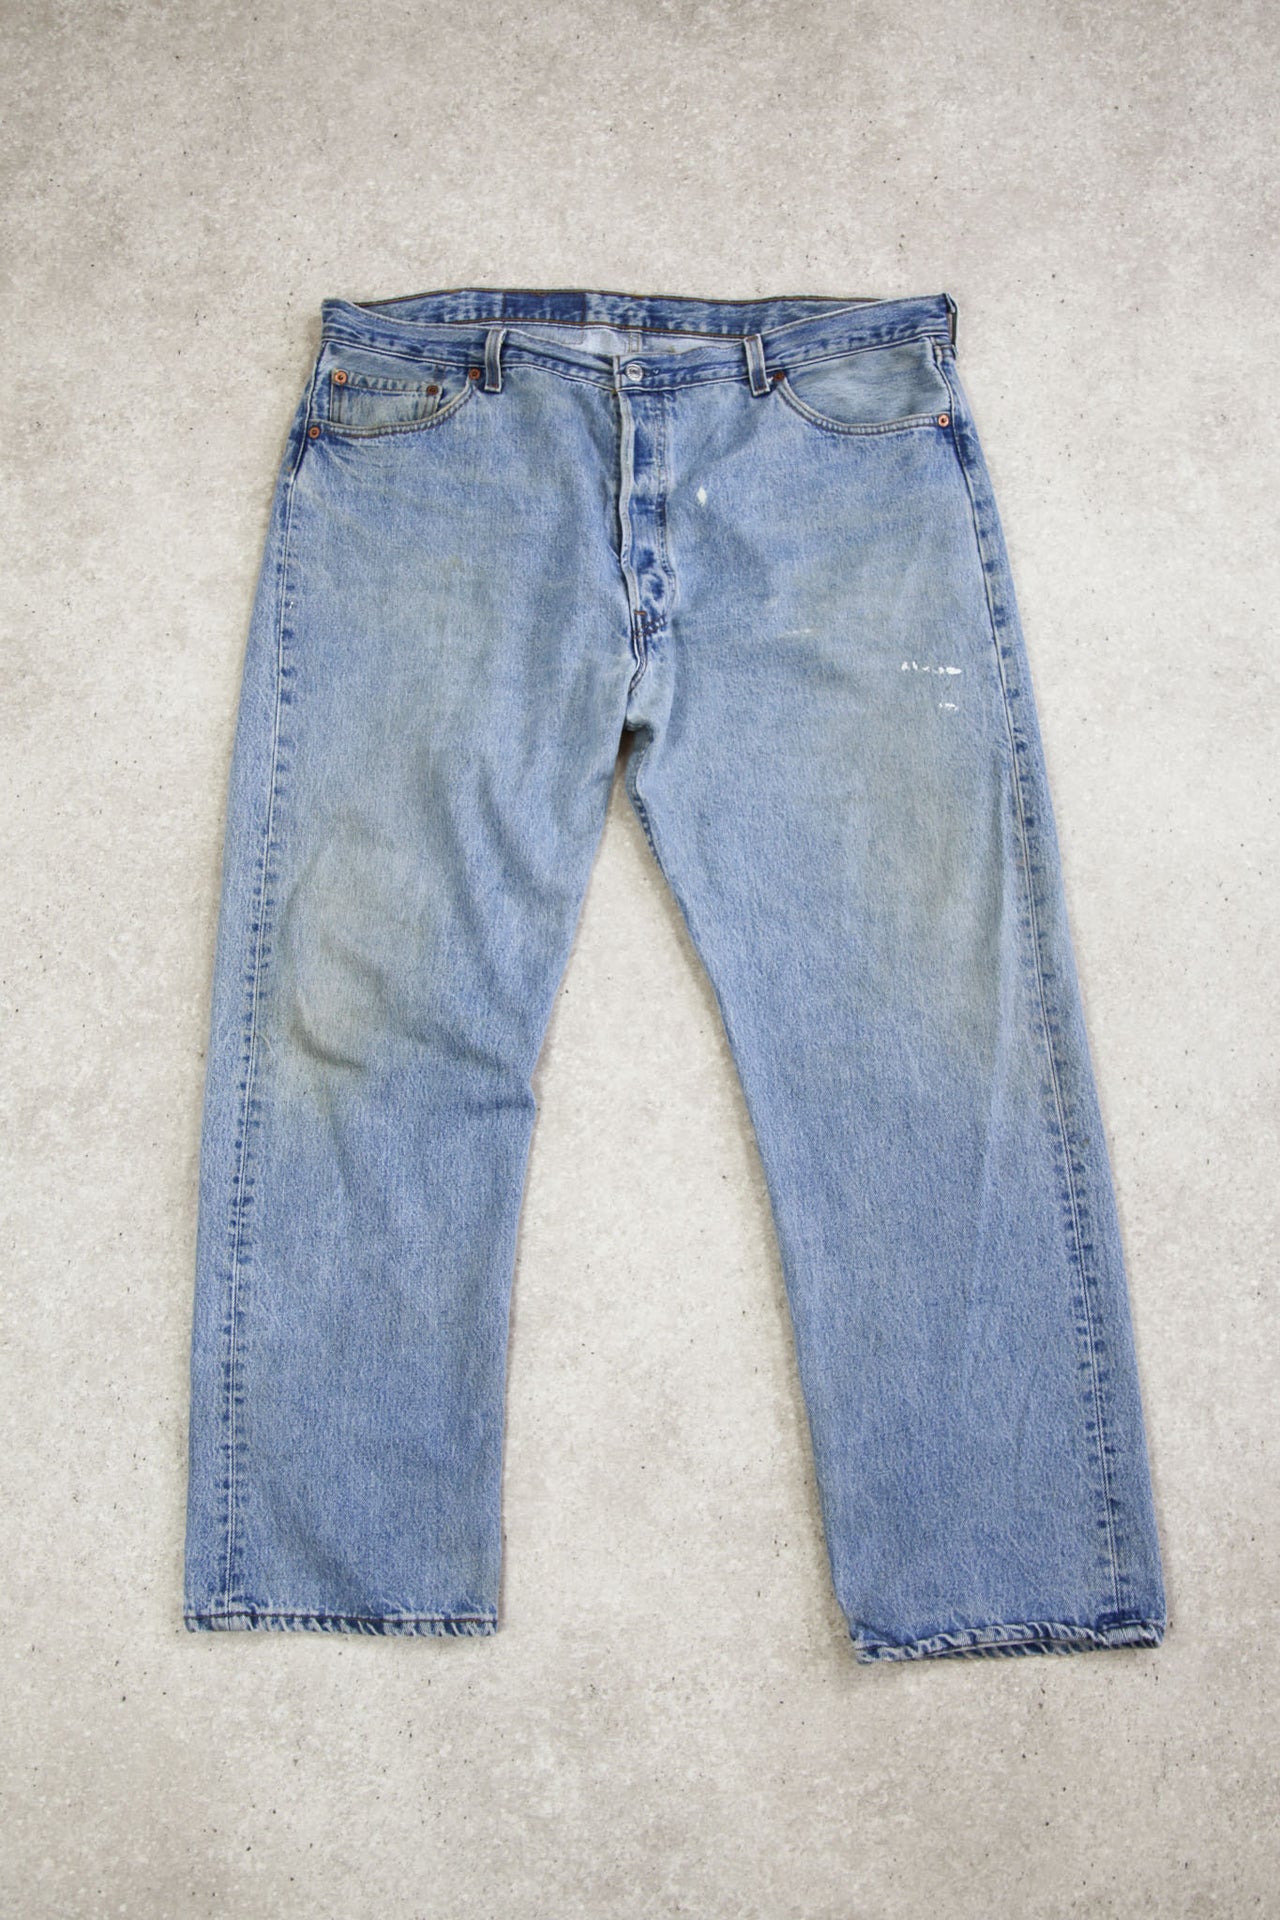 Made in USA Levi's 501 Light Wash Jeans (W42 L30)